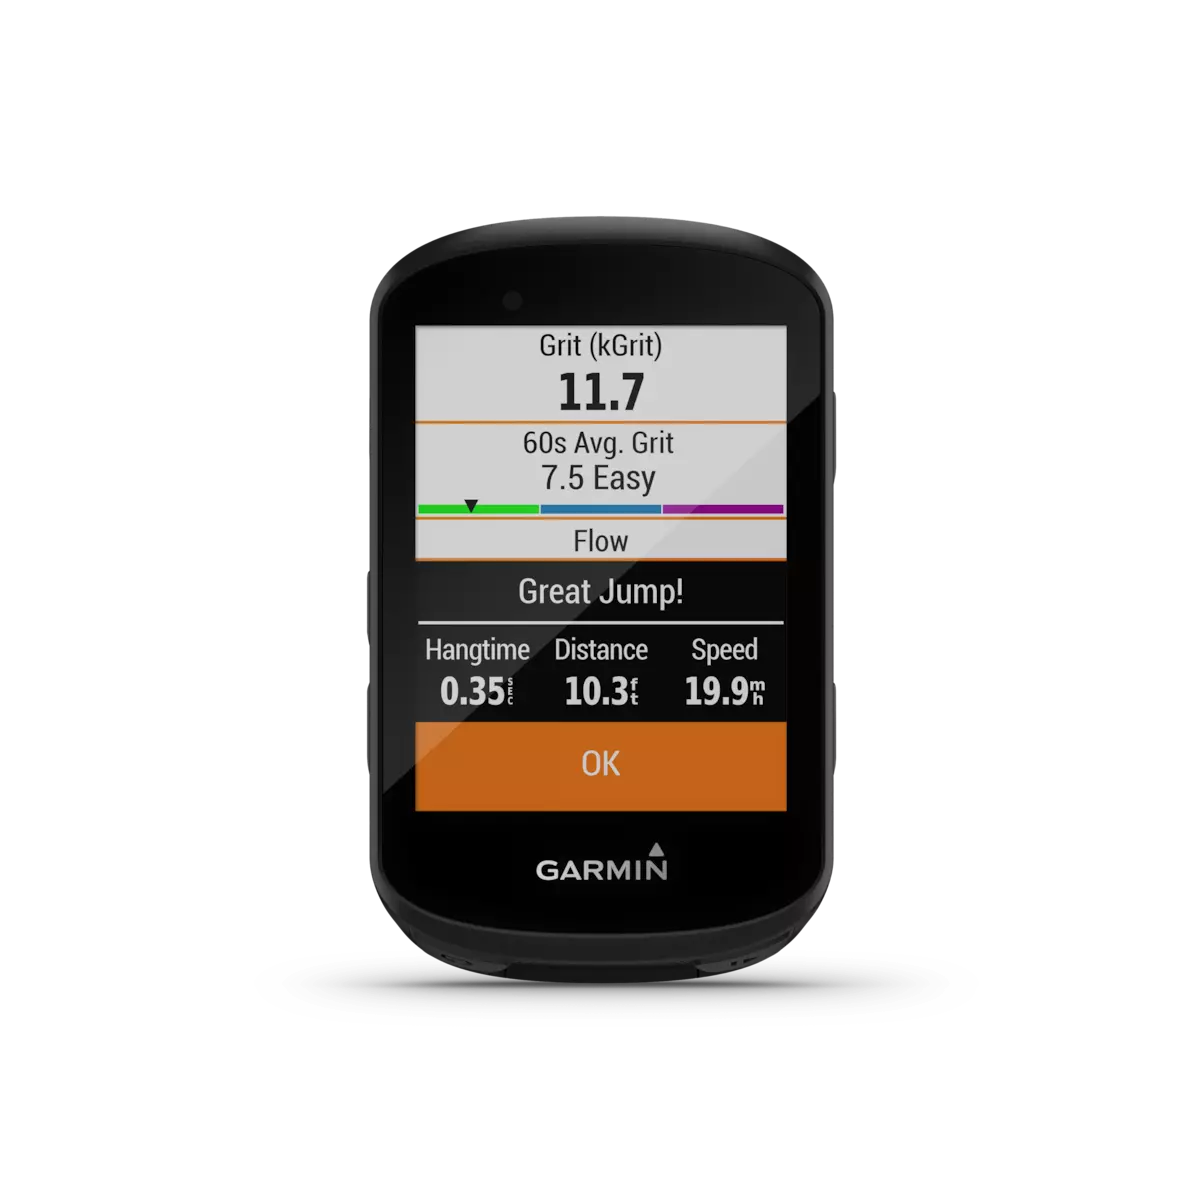 Garmin Edge 530 bike computer is now even better value thanks to some great  mapping software updates